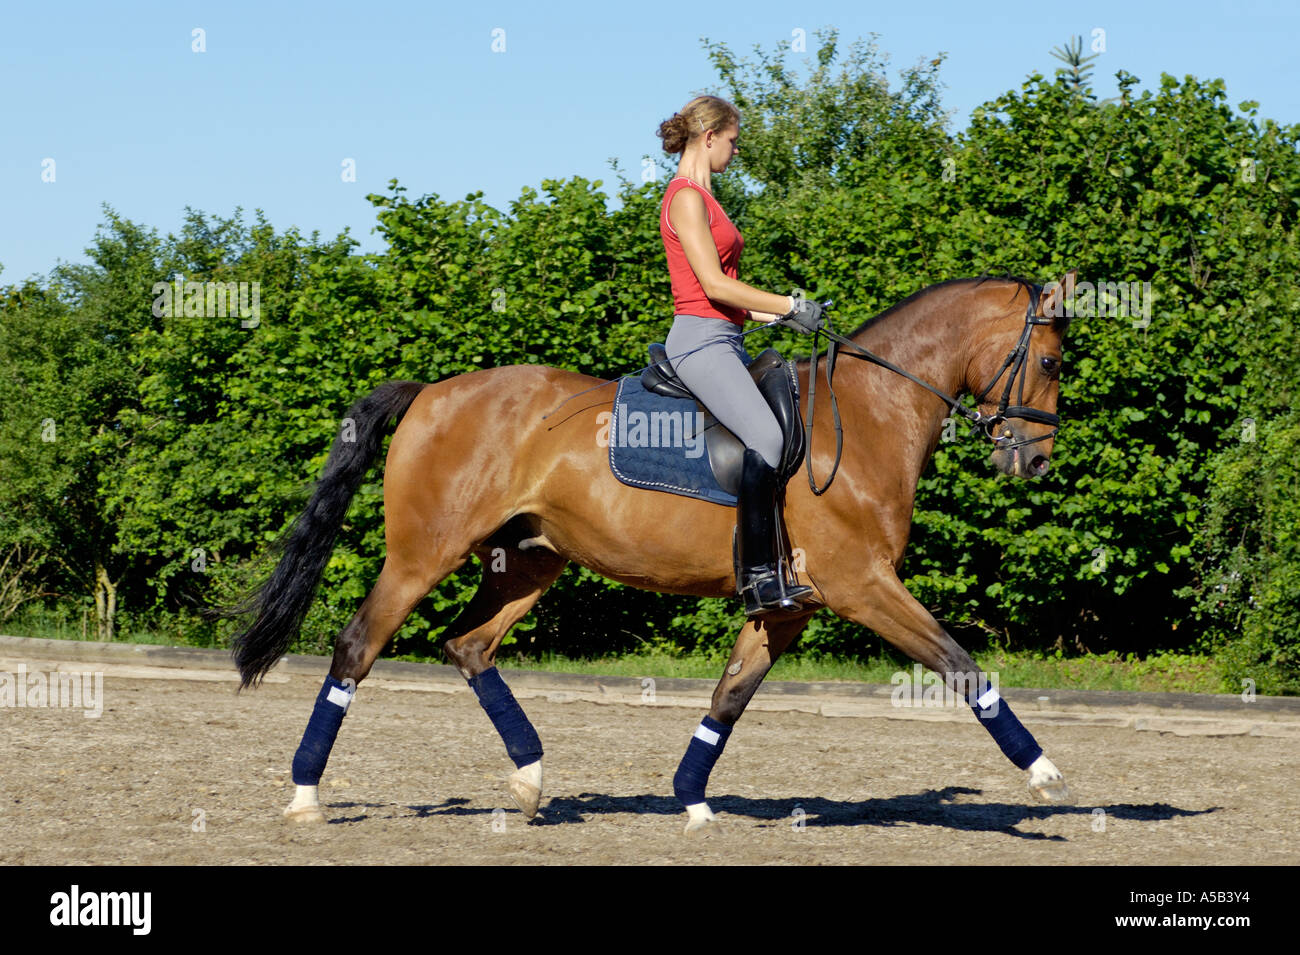 Teenage dressage rider on back of Hanoverian horse in trot Stock Photo